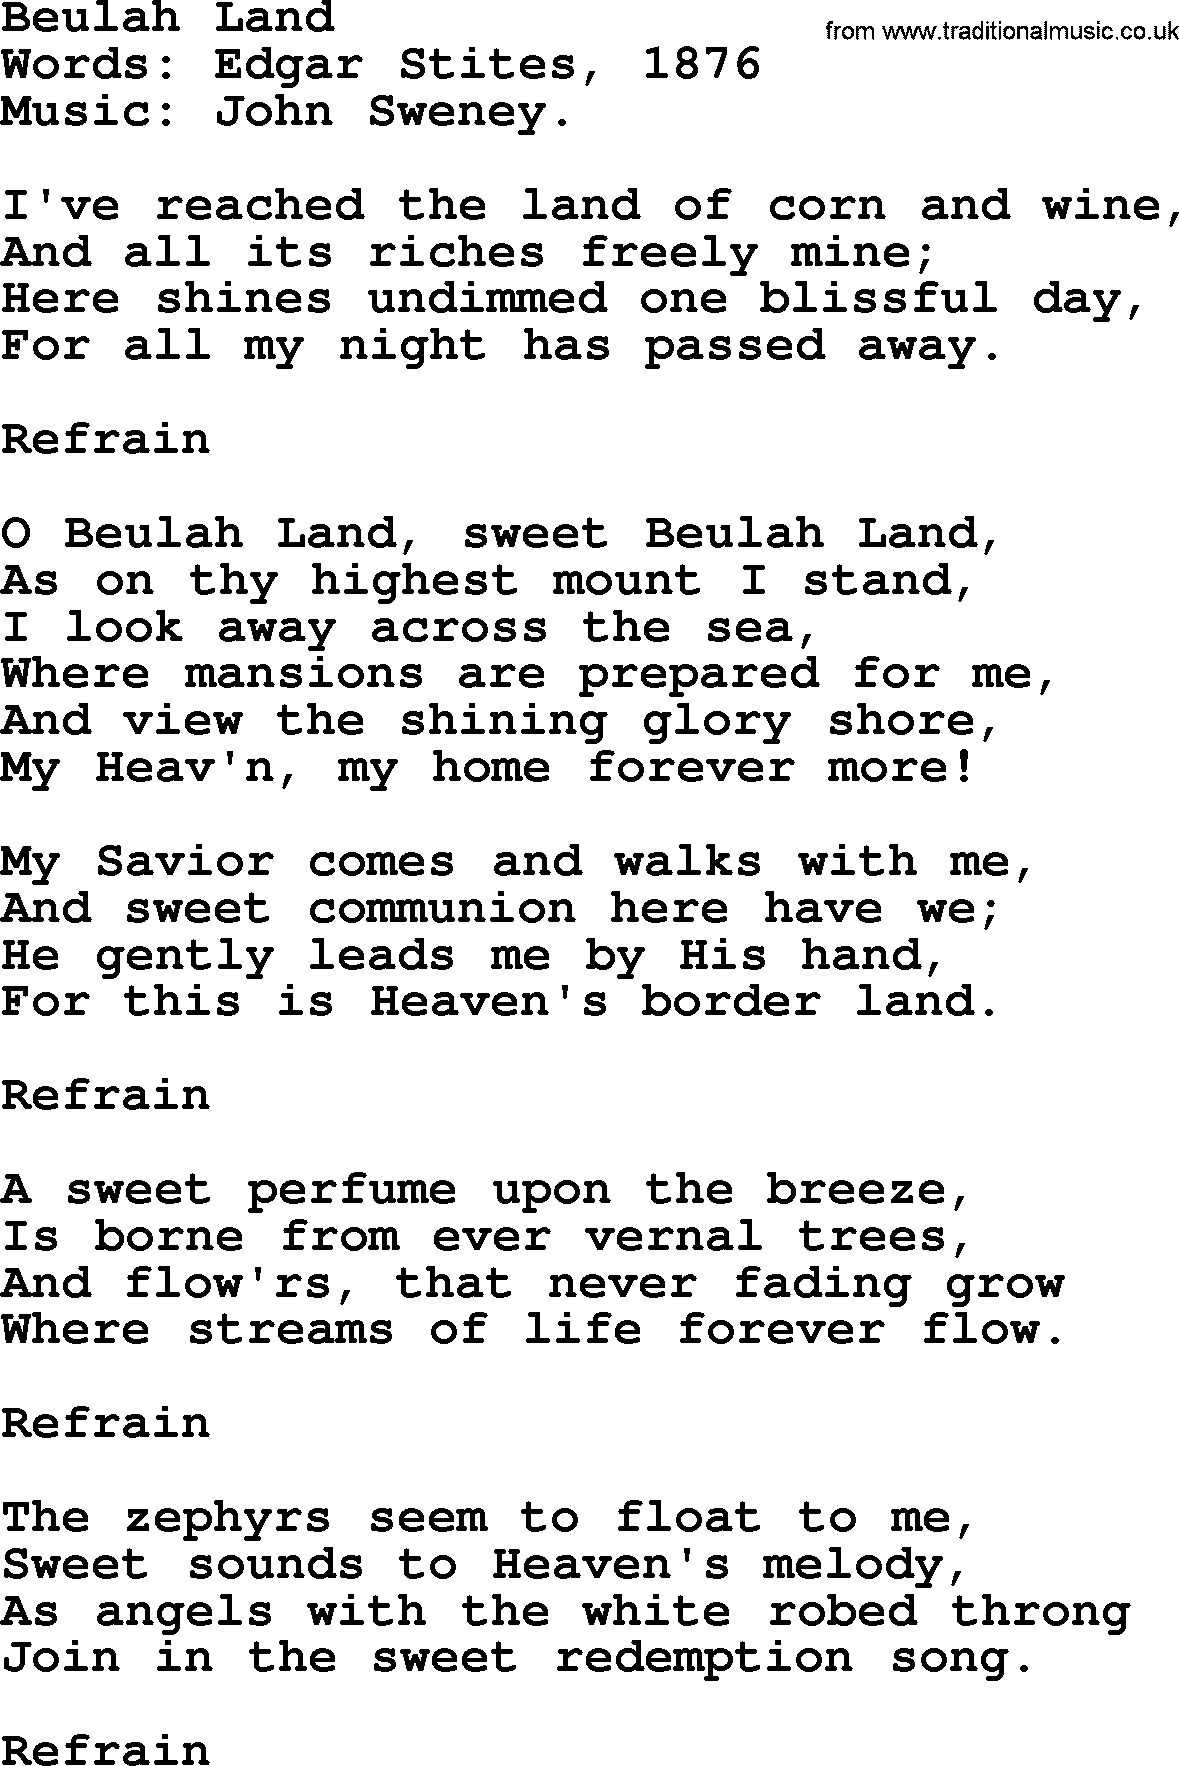 Songs and Hymns about Heaven: Beulah Land lyrics with PDF